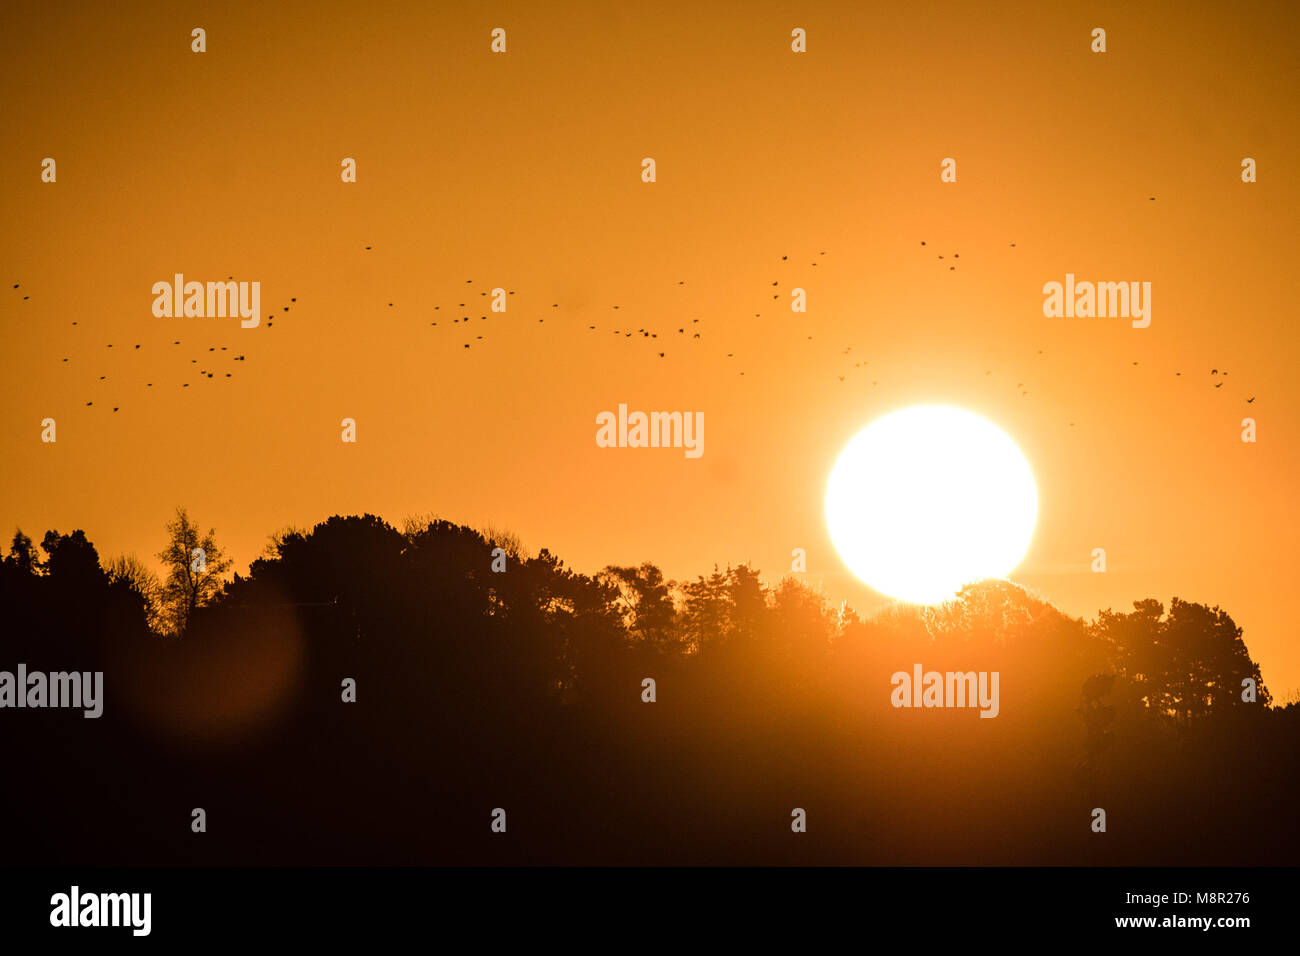 Aberystwyth Wales UK, Tuesday 20 March 2018 UK Weather: The sun rises gloriously on Spring Equinox morning in Aberystwyth on the west coast of Wales. With day and night of equal length, the spring equinox today marks the start of 'astronomical spring' photo Credit: Keith Morris/Alamy Live News Stock Photo